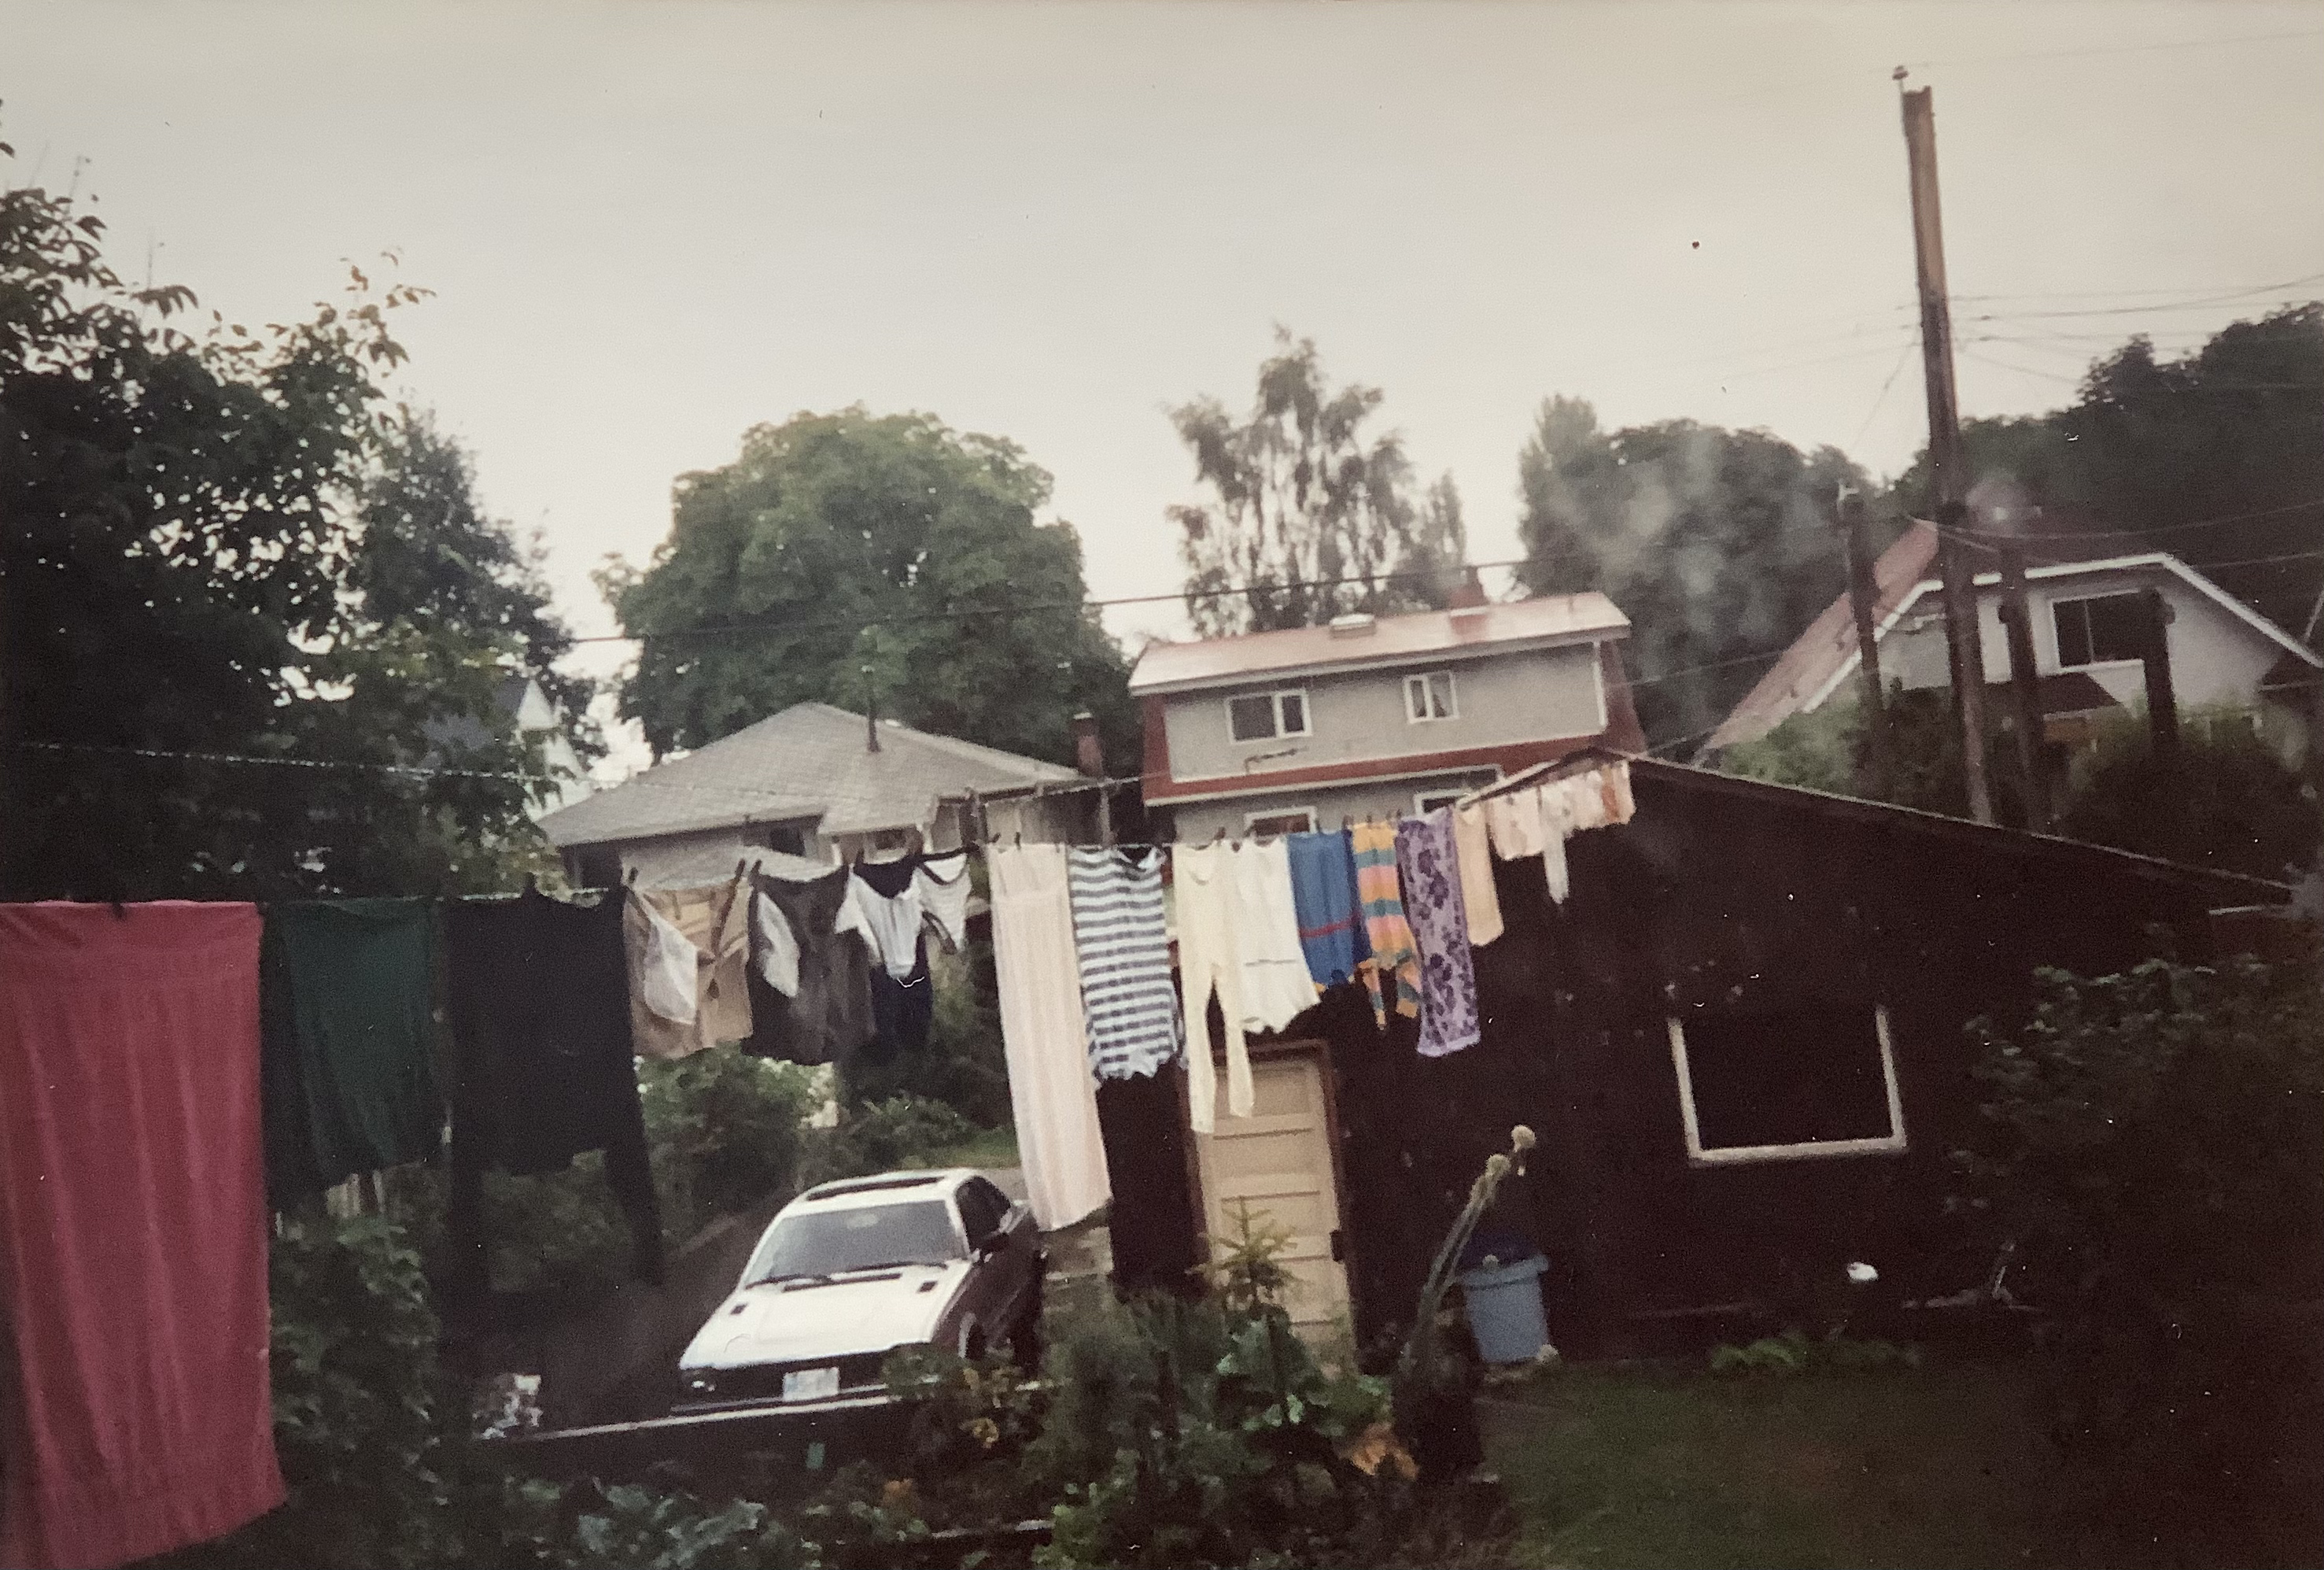 Backyard on a grey day, showing a clothesline, on which laundry is hanging to dry. The grass below and trees in the background are a deep green. There is also a shed in the background that is dark brown, beside which there is a parked car. The image appears to be from roughly the 1960s.